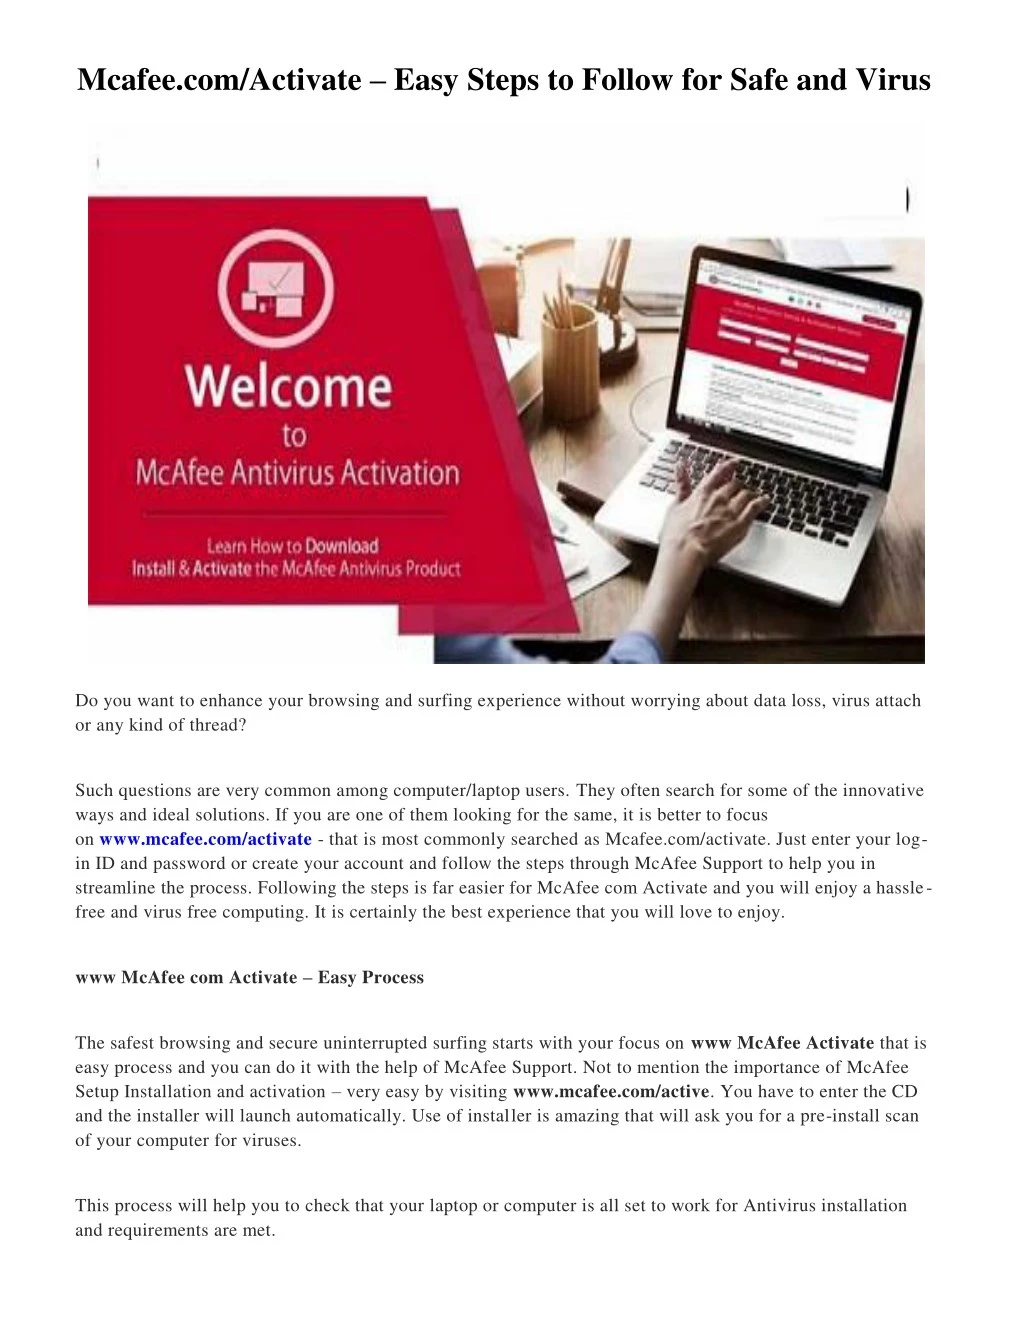 mcafee com activate easy steps to follow for safe